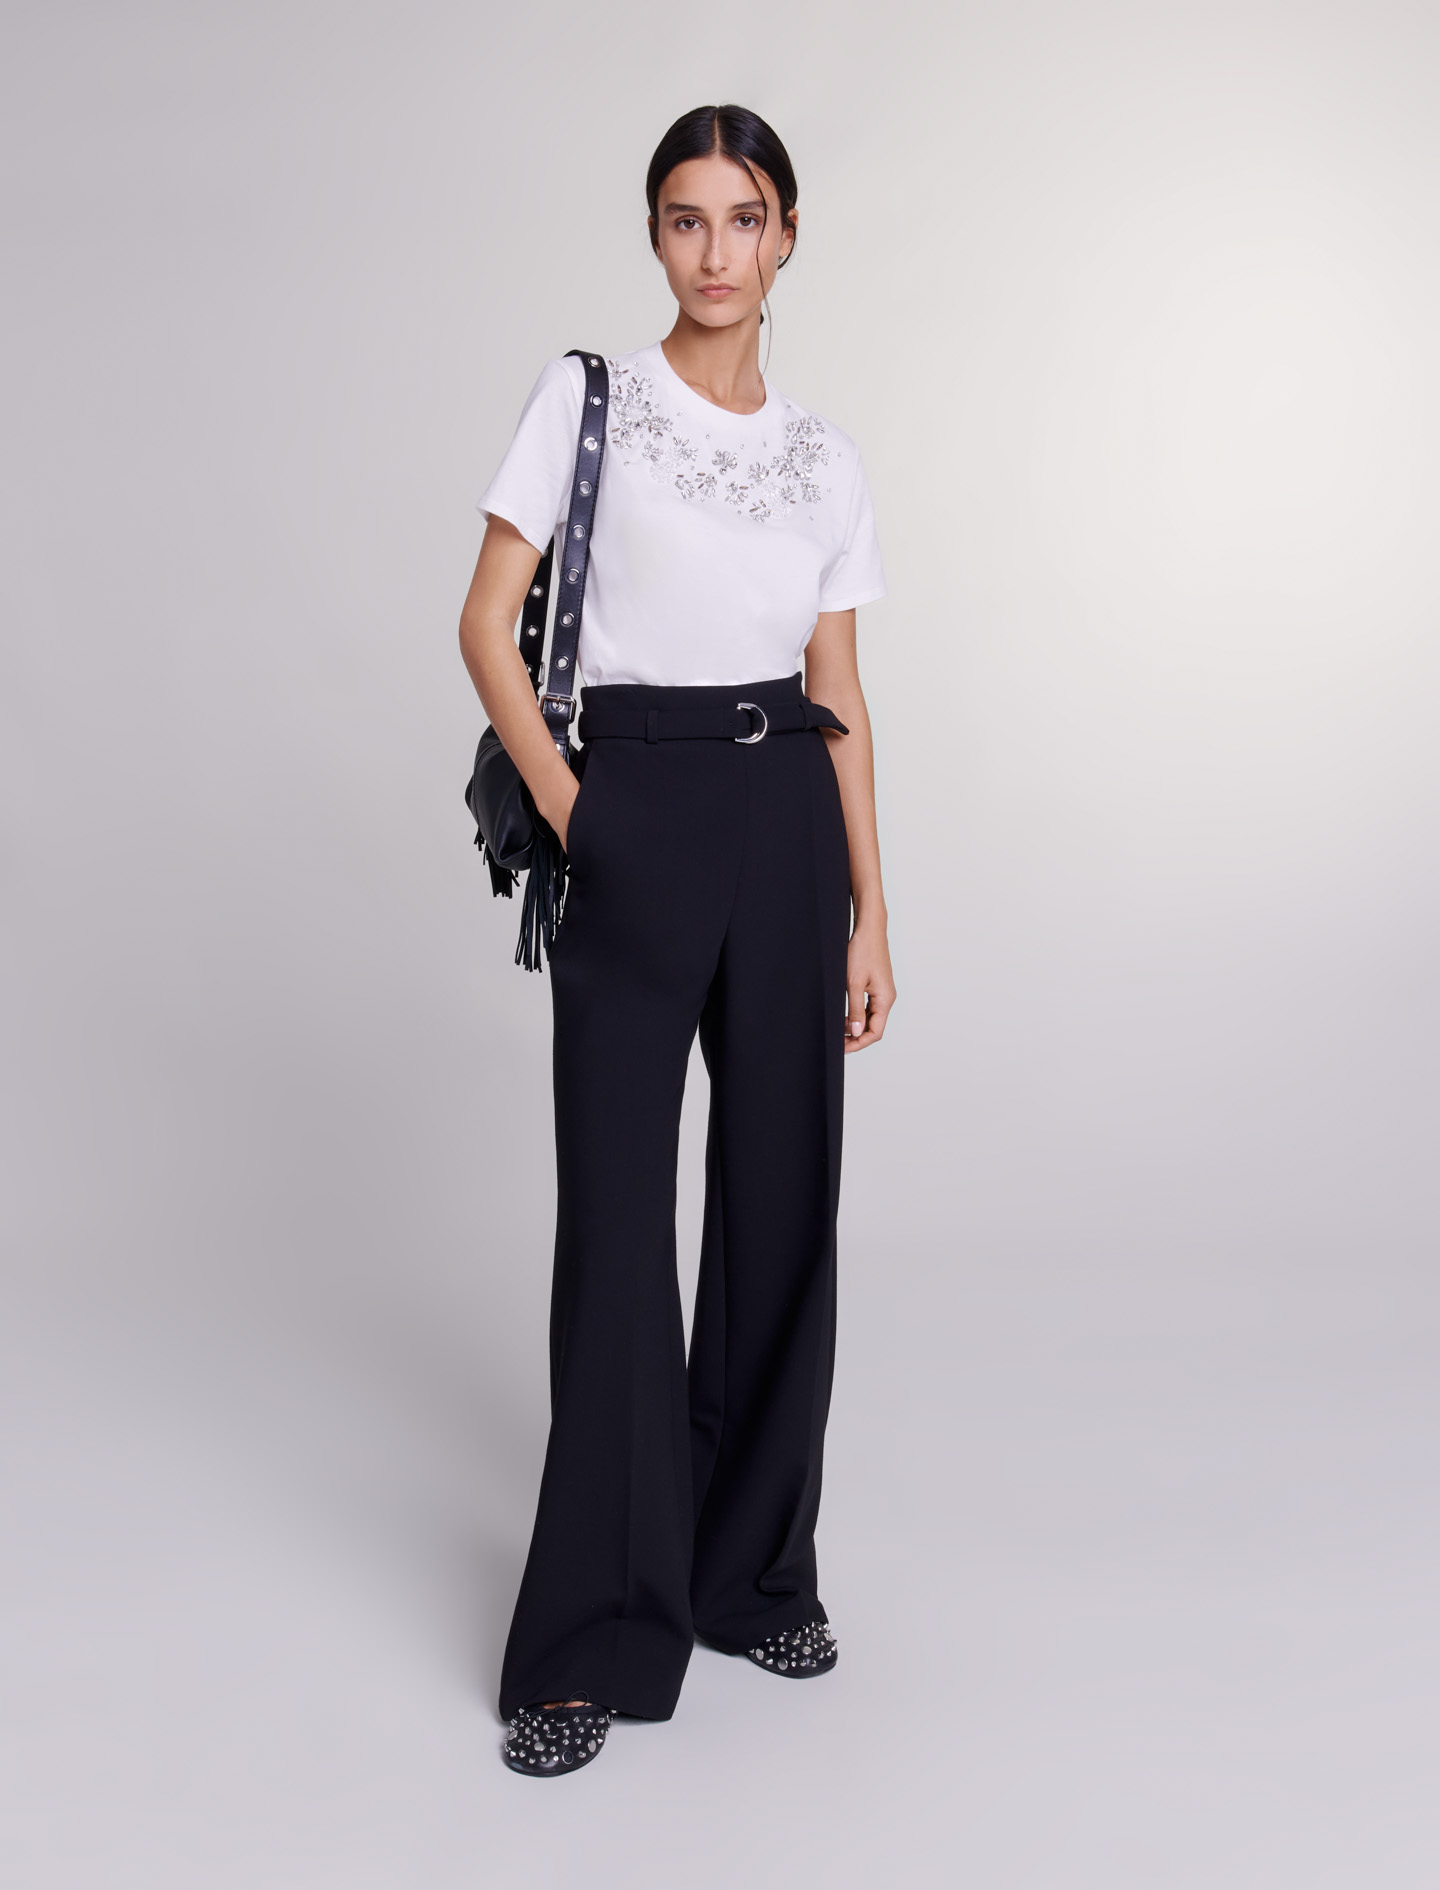 Maje Woman's polyester, Wide belted trousers for Spring/Summer, in color Black / Black